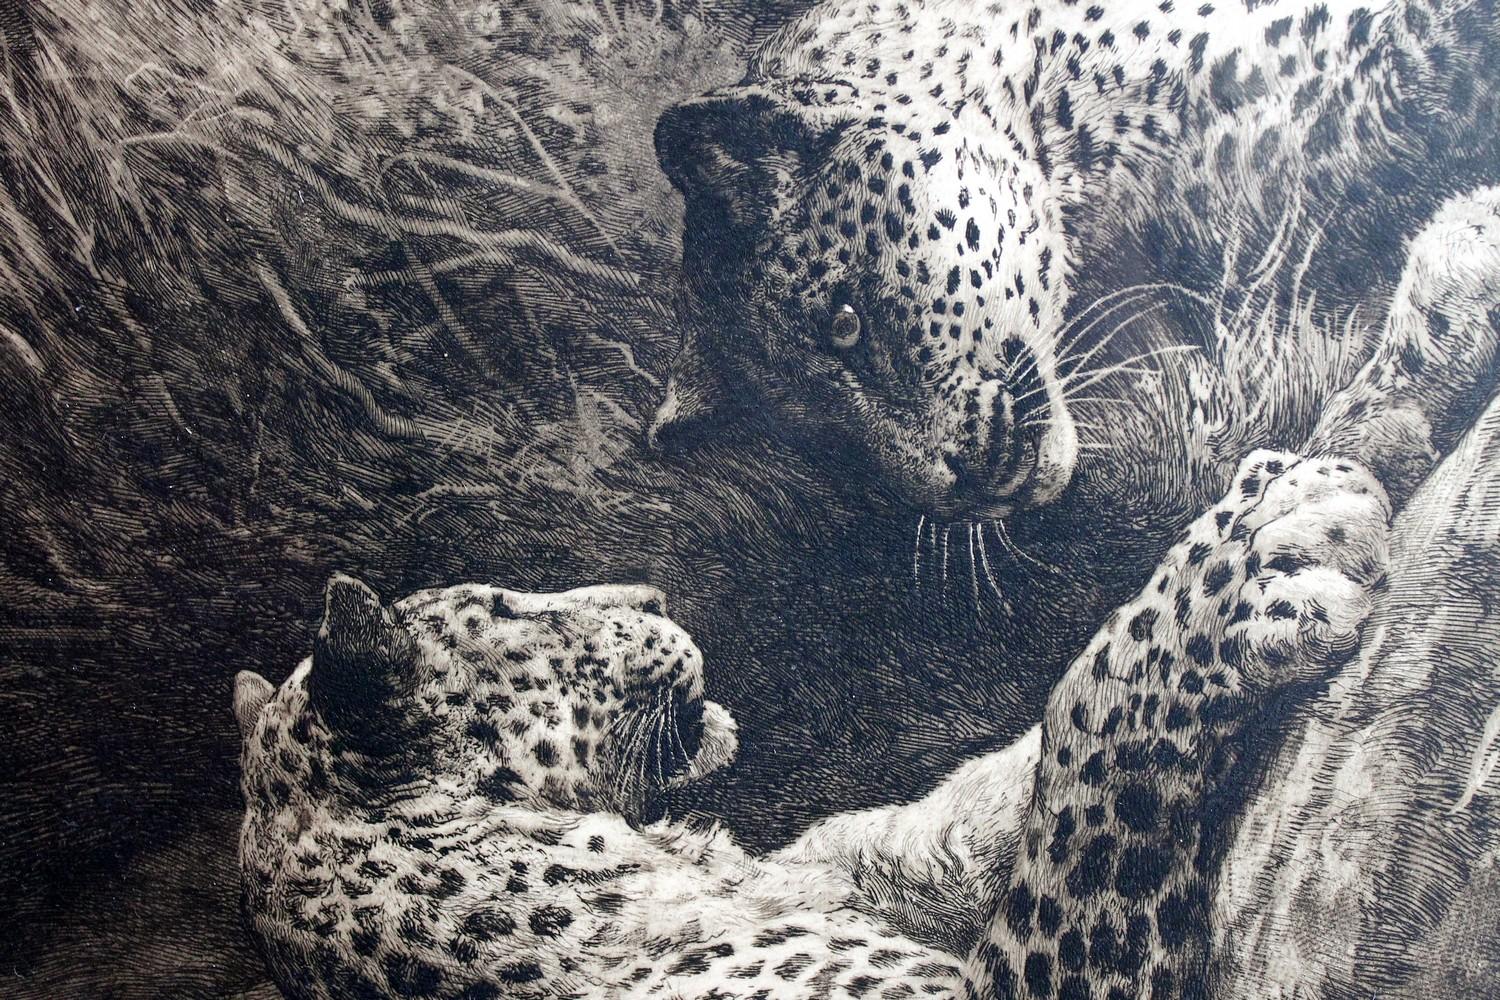 Antique Black and White Etching with Leopards Playing  - Print by Herbert Dicksee